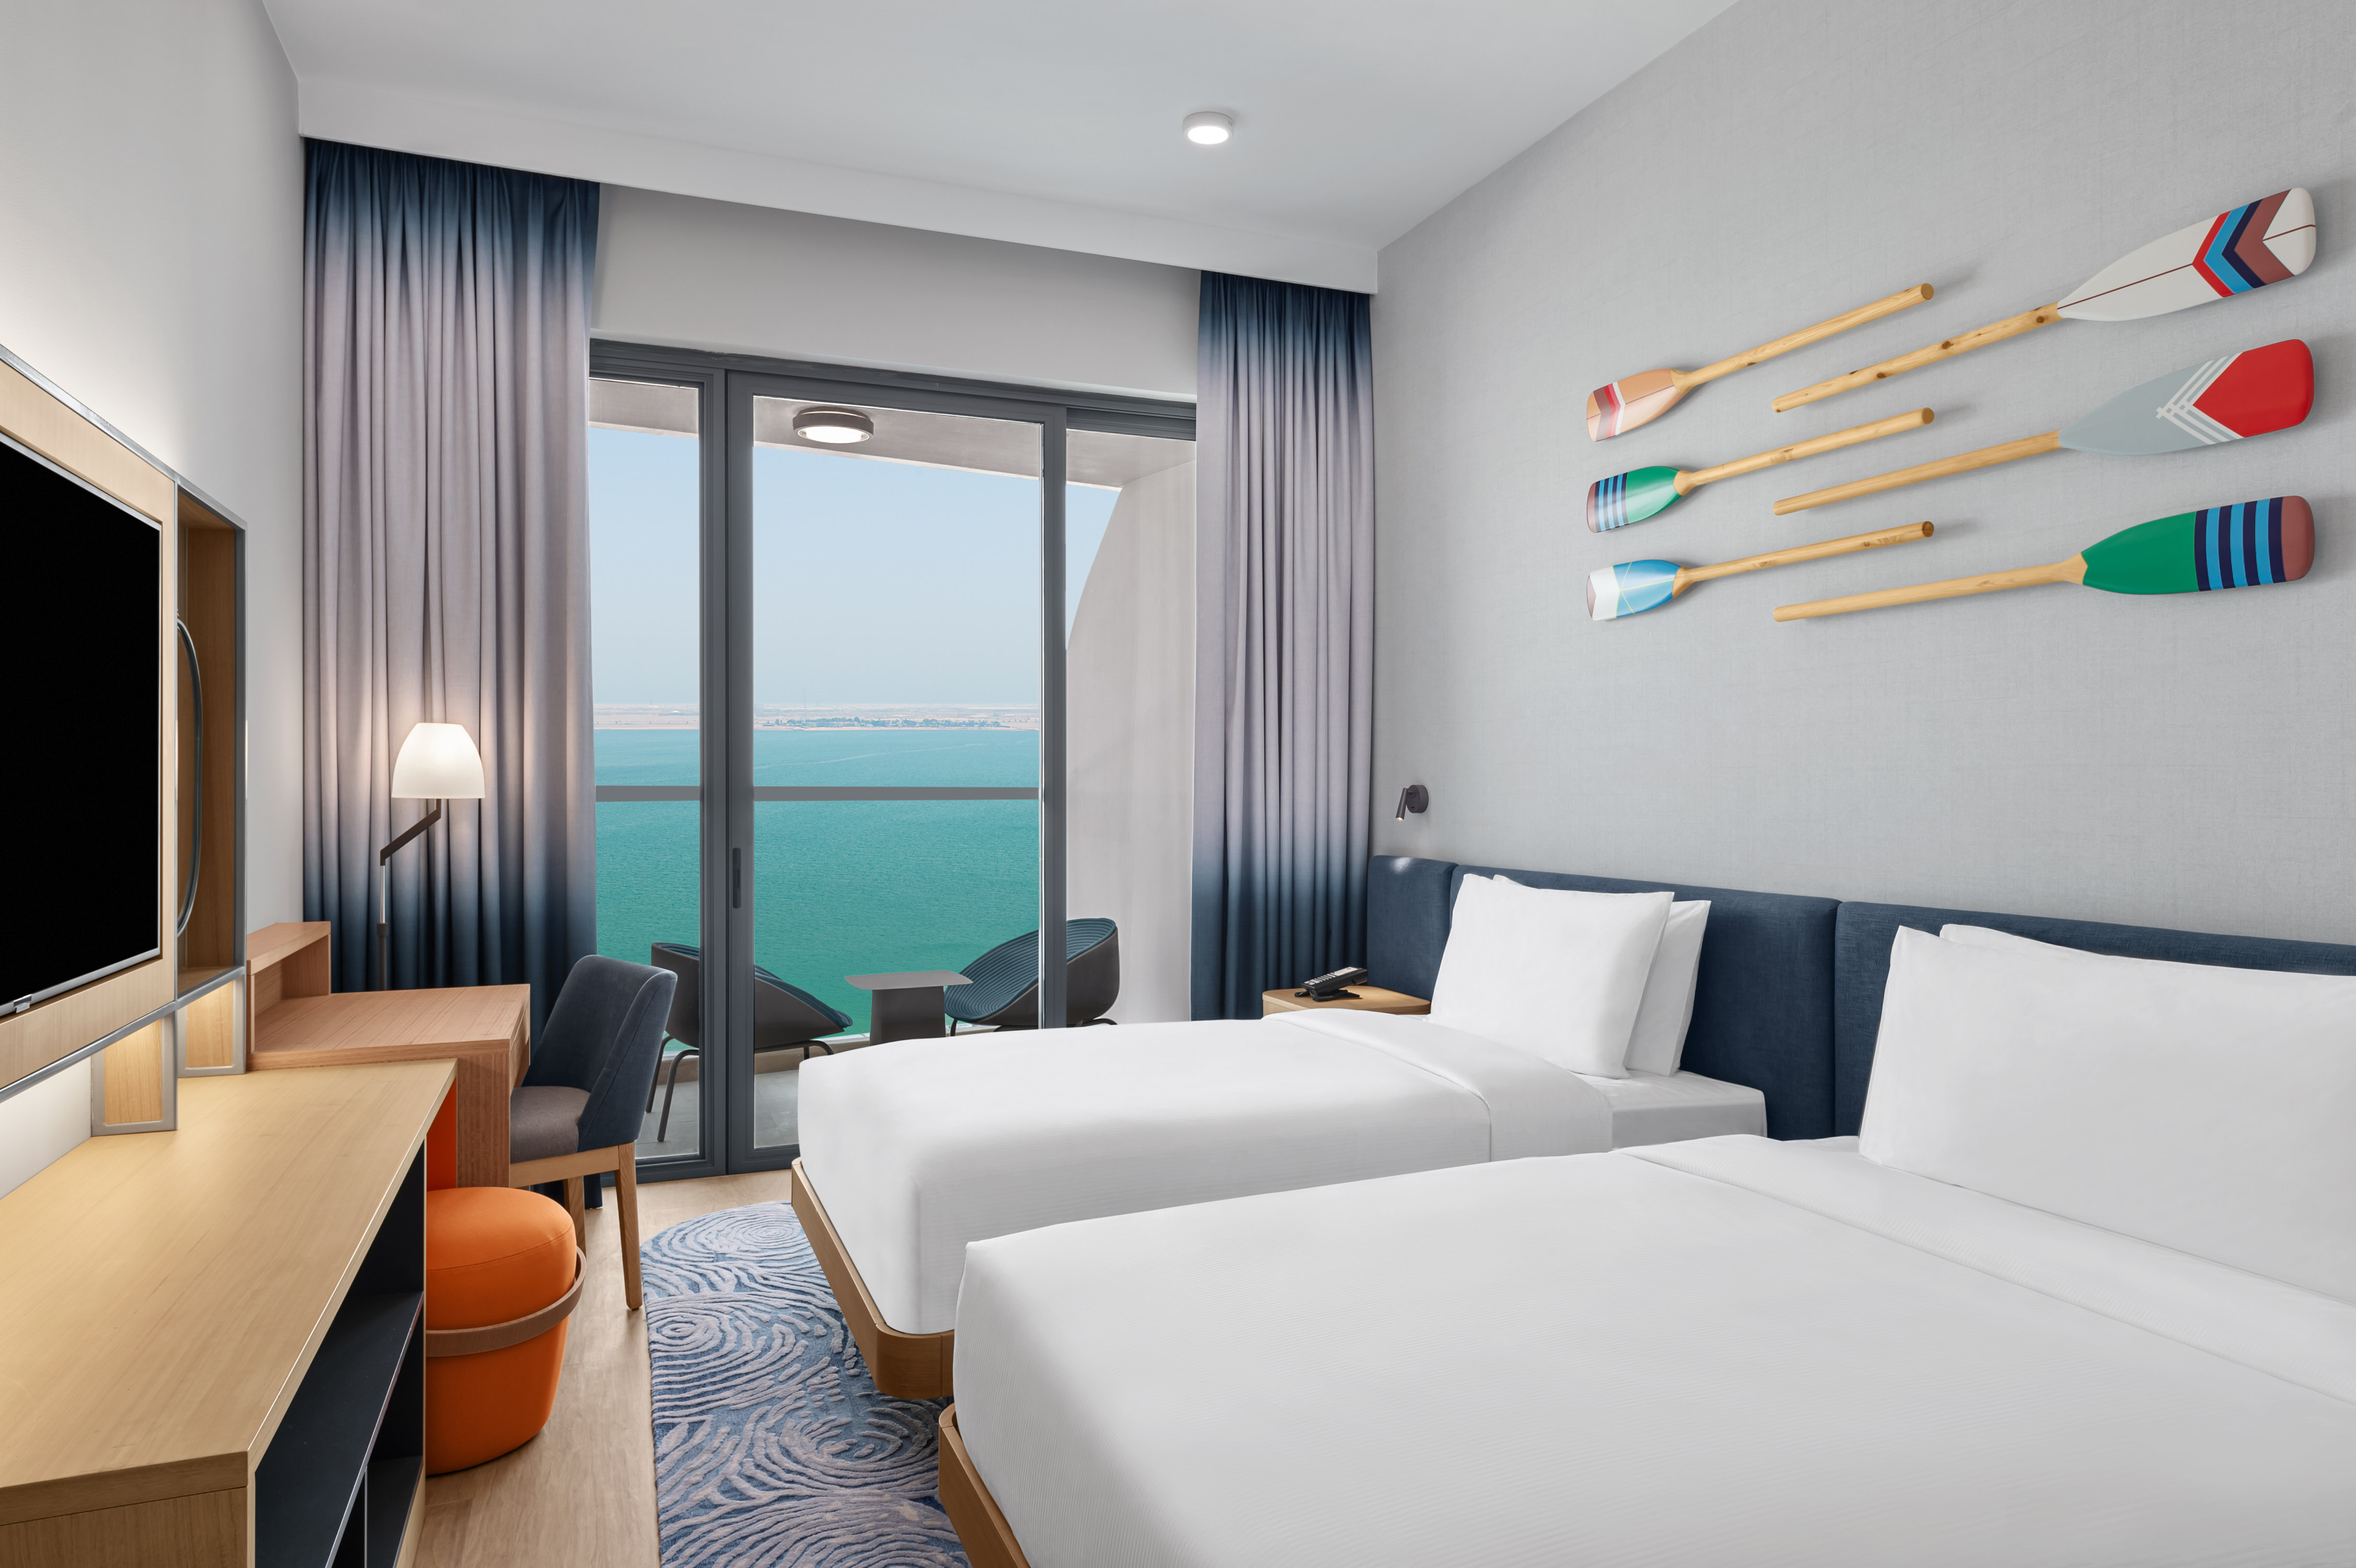 Double Bedroom With Sea View